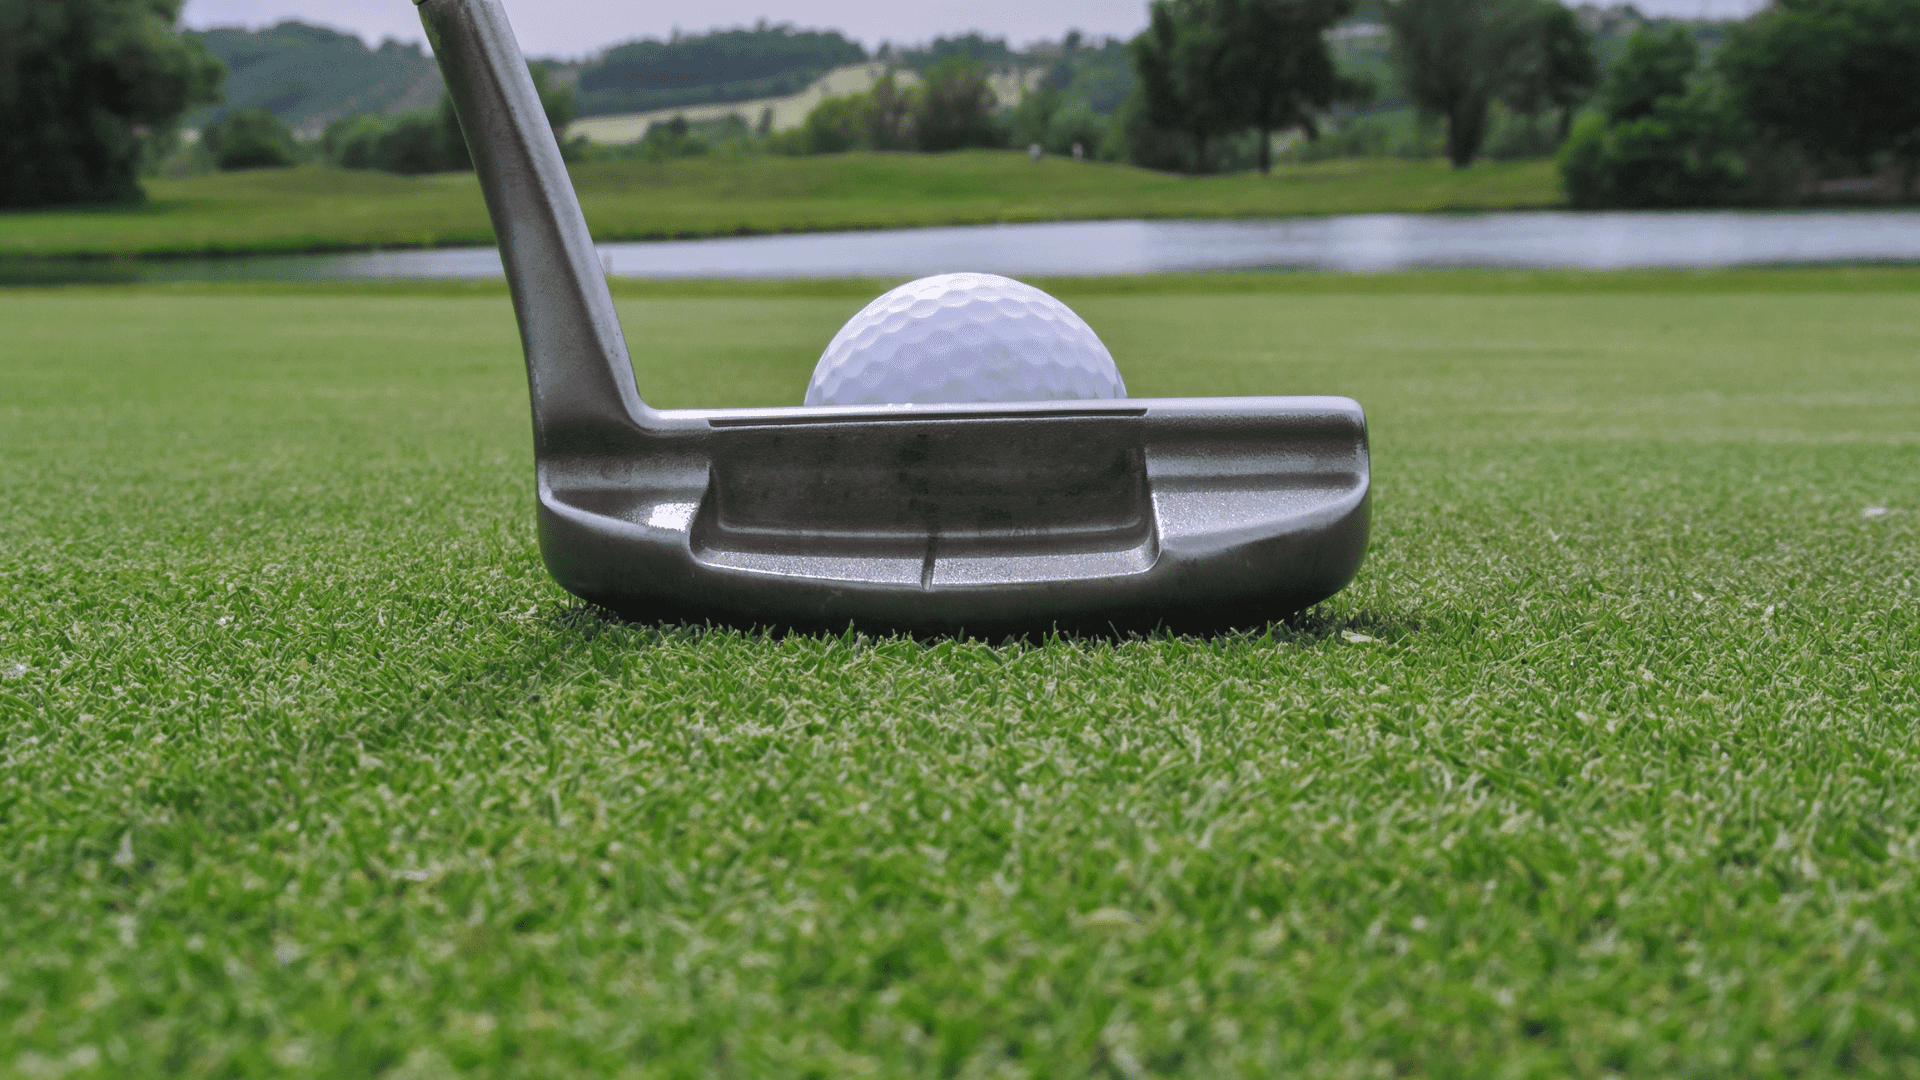 best counterbalanced putters - photo of a counterbalanced putter and golf ball on the green near a pond.